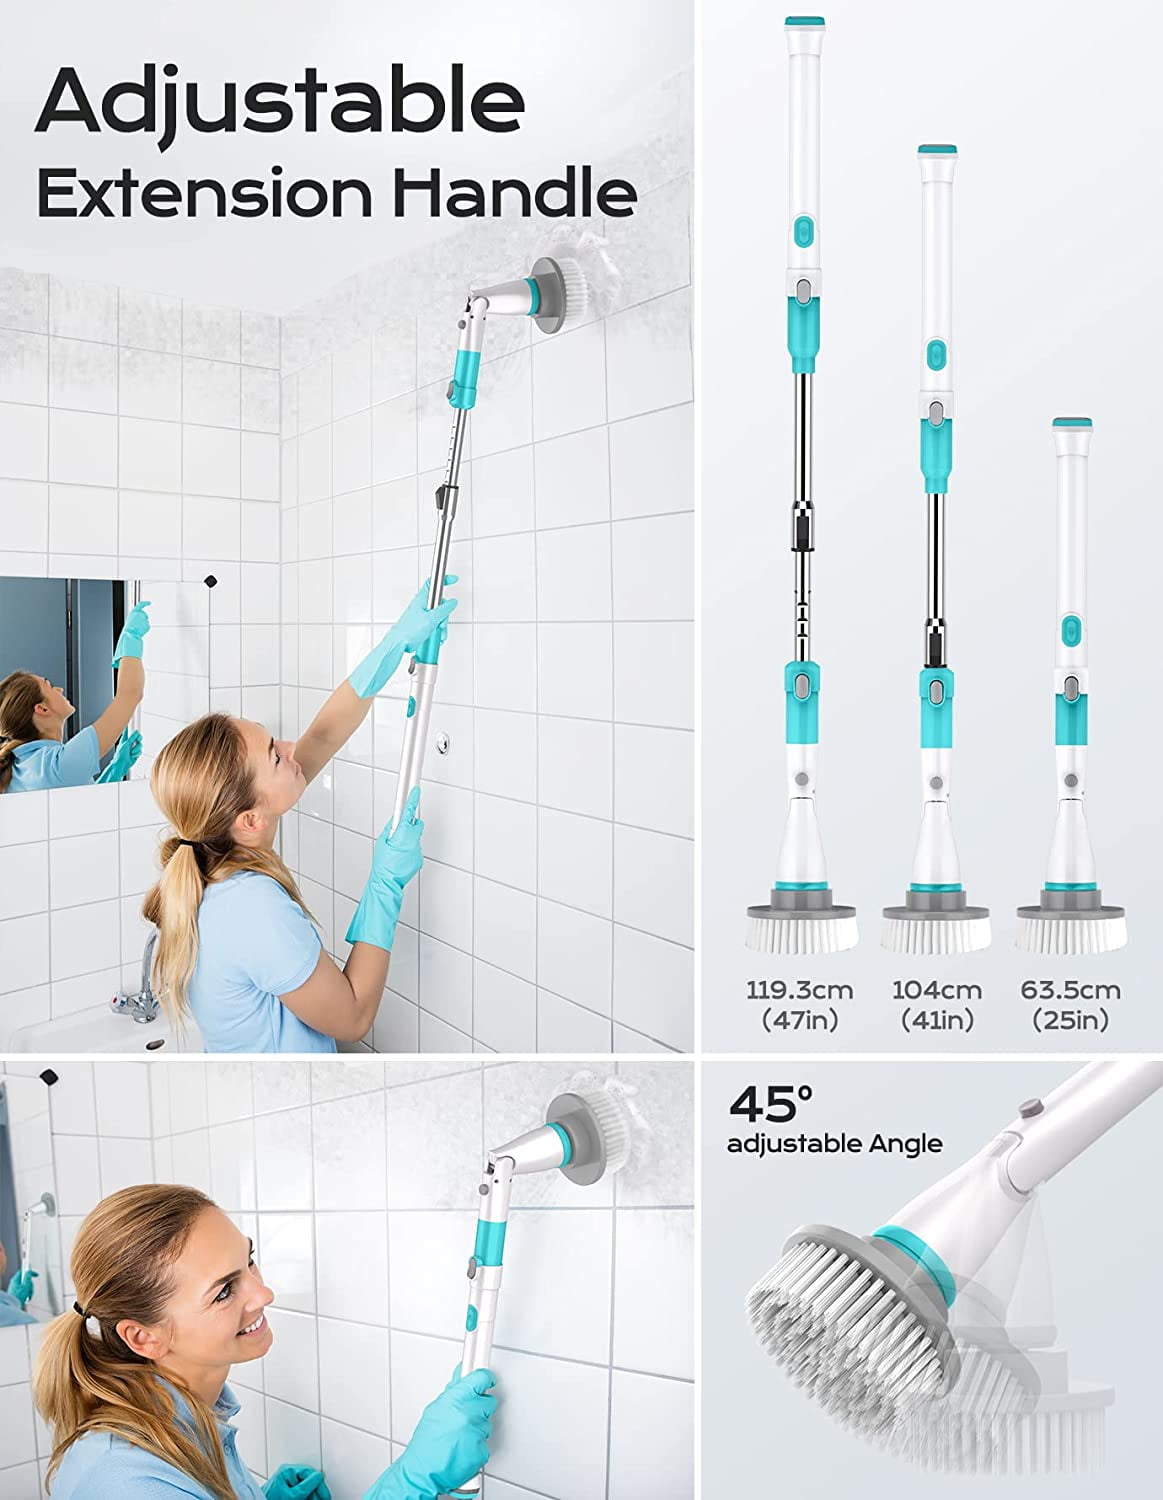 Multi-functional Electric Cleaning Brush for Kitchen and Bathroom